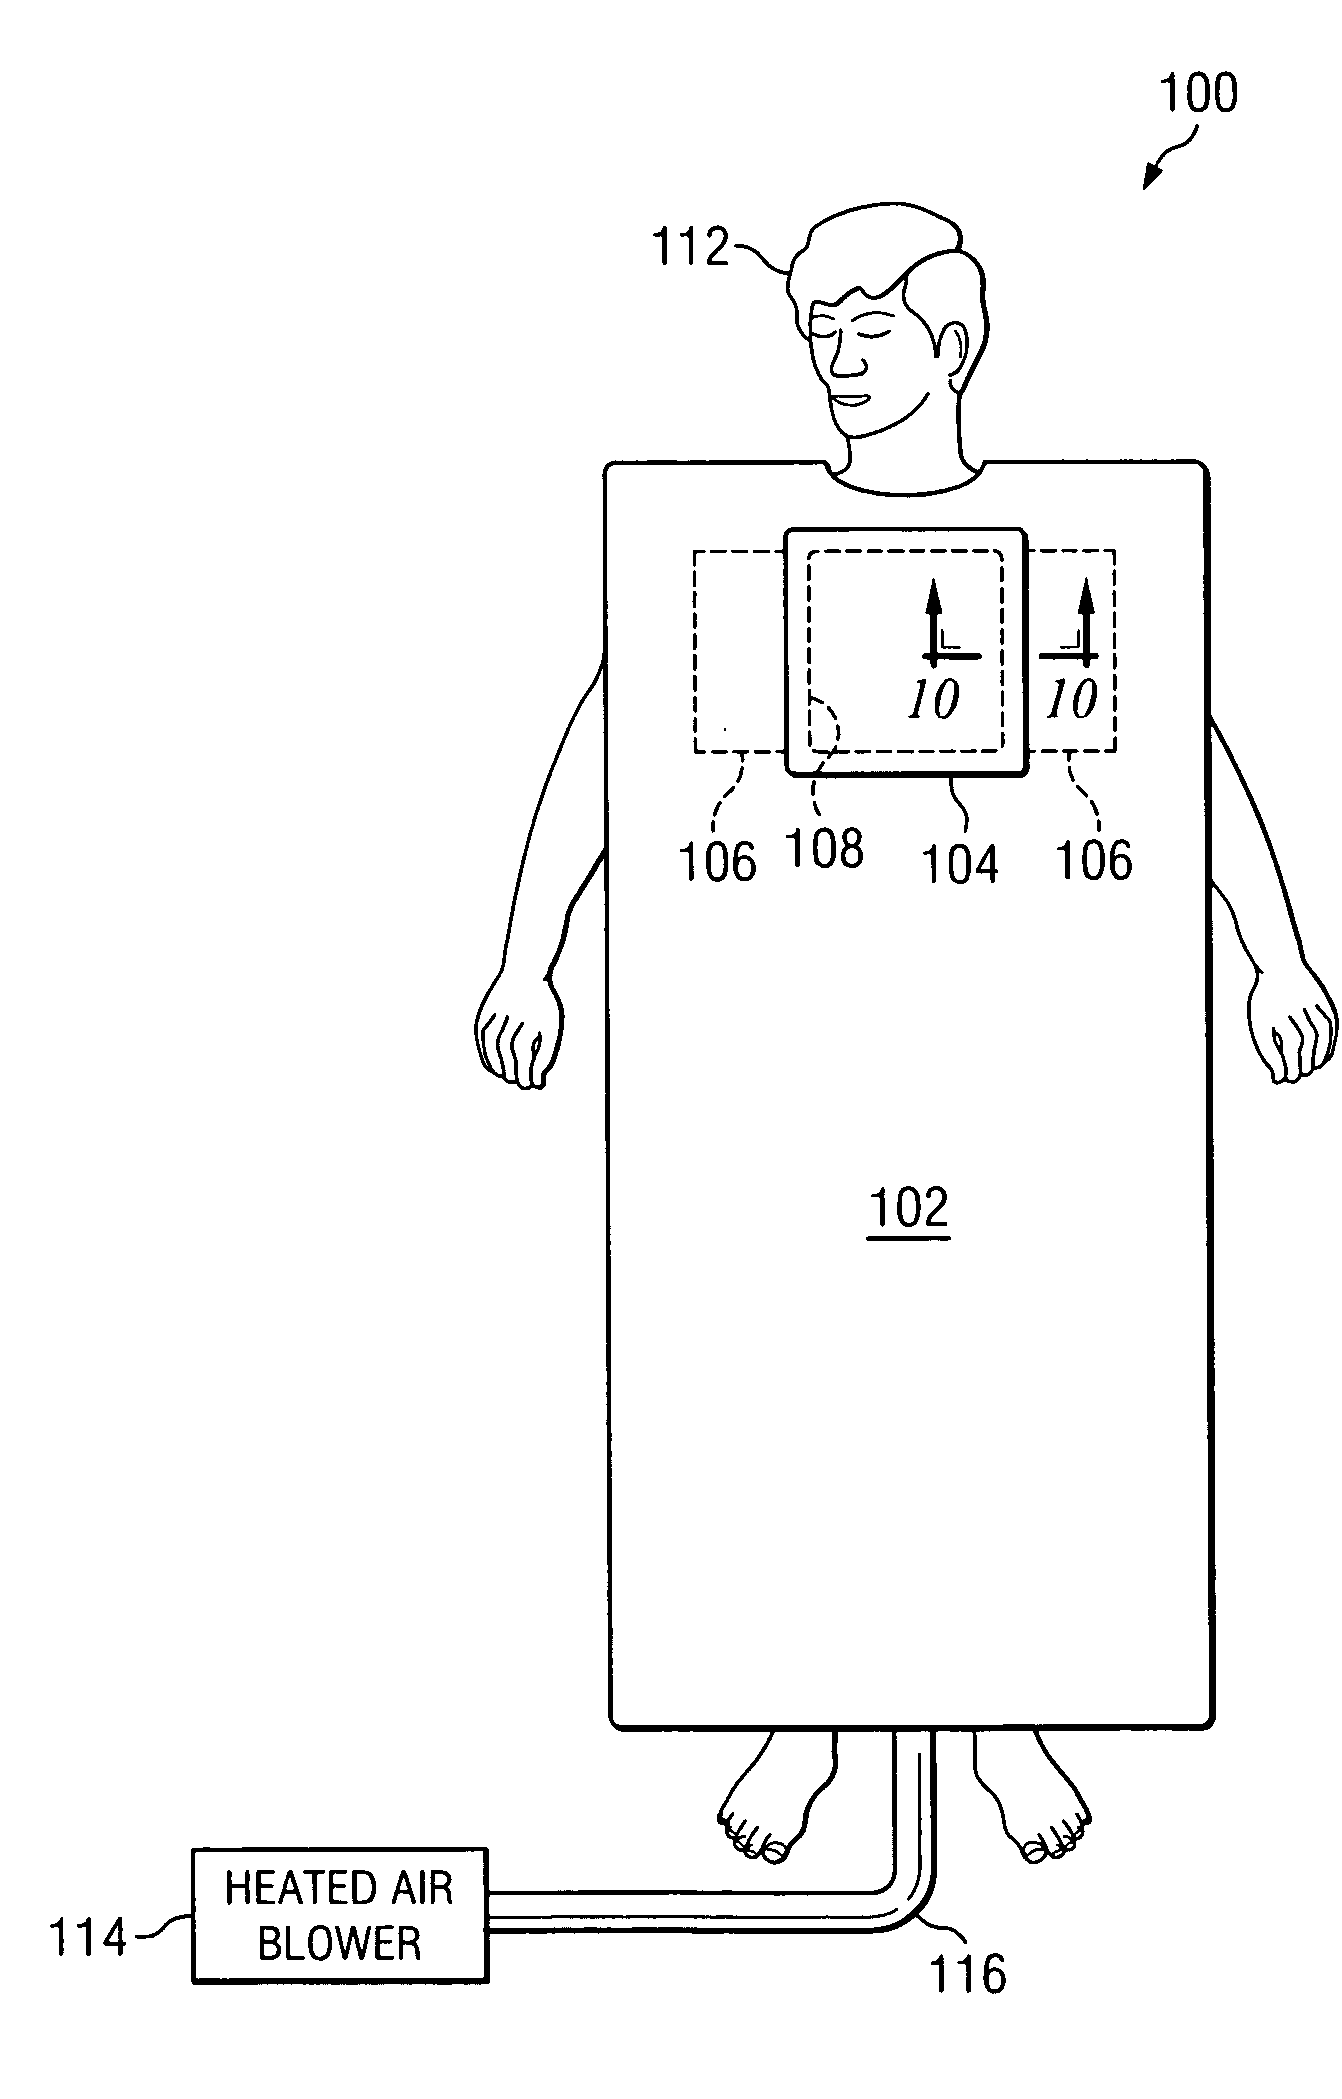 Use of convective air warming system for patient care